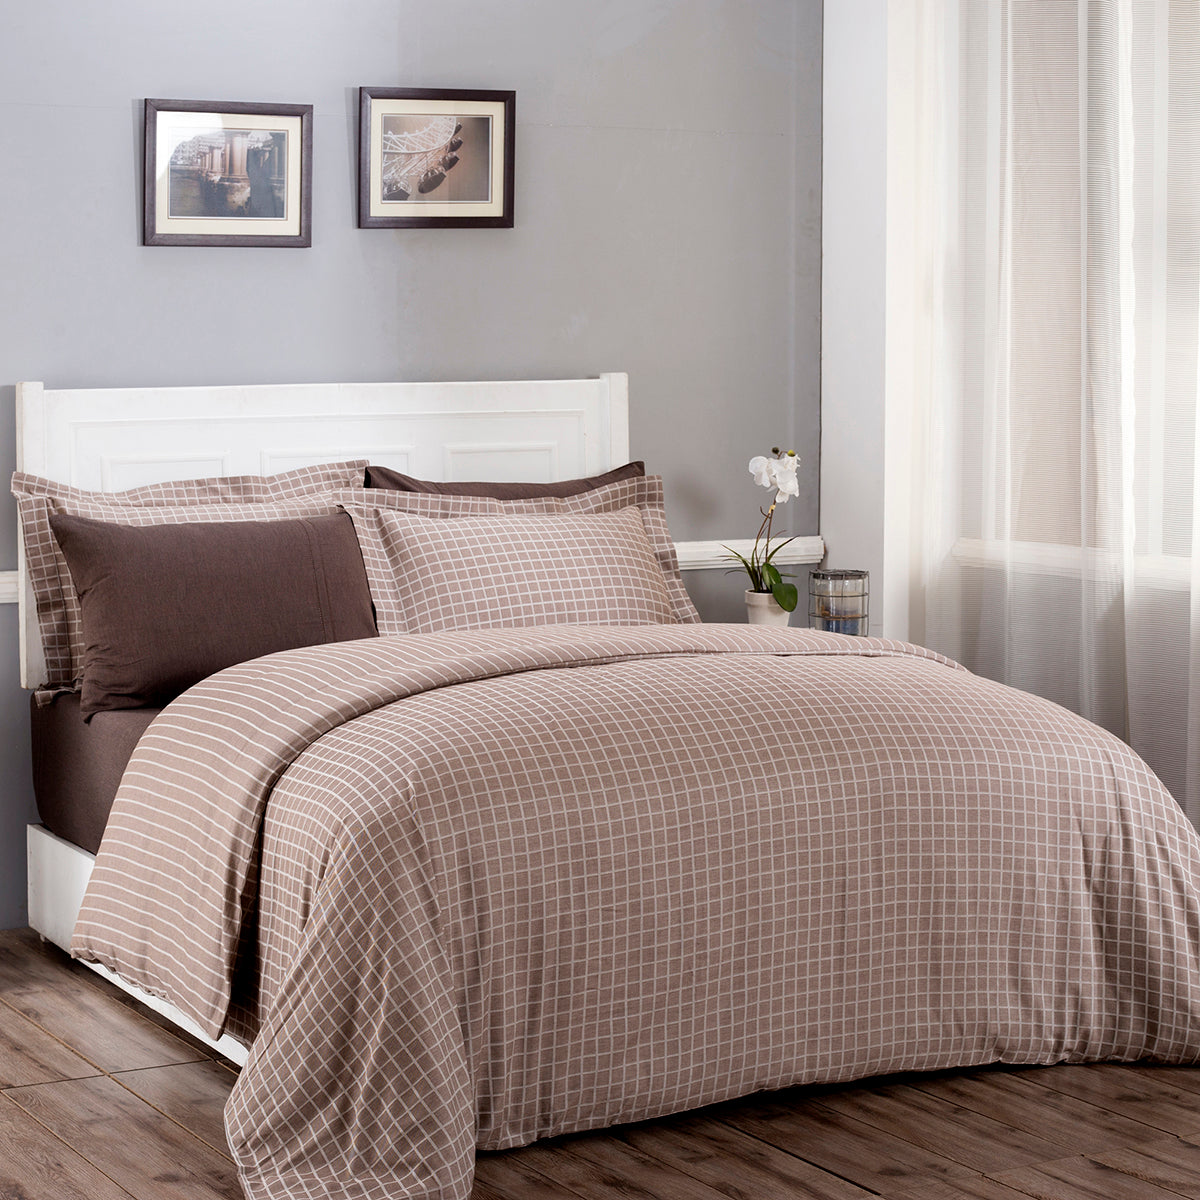 Bliss Reversible Made With Egyptian Cotton Ultra Soft Brown Duvet Cover With Pillow Case